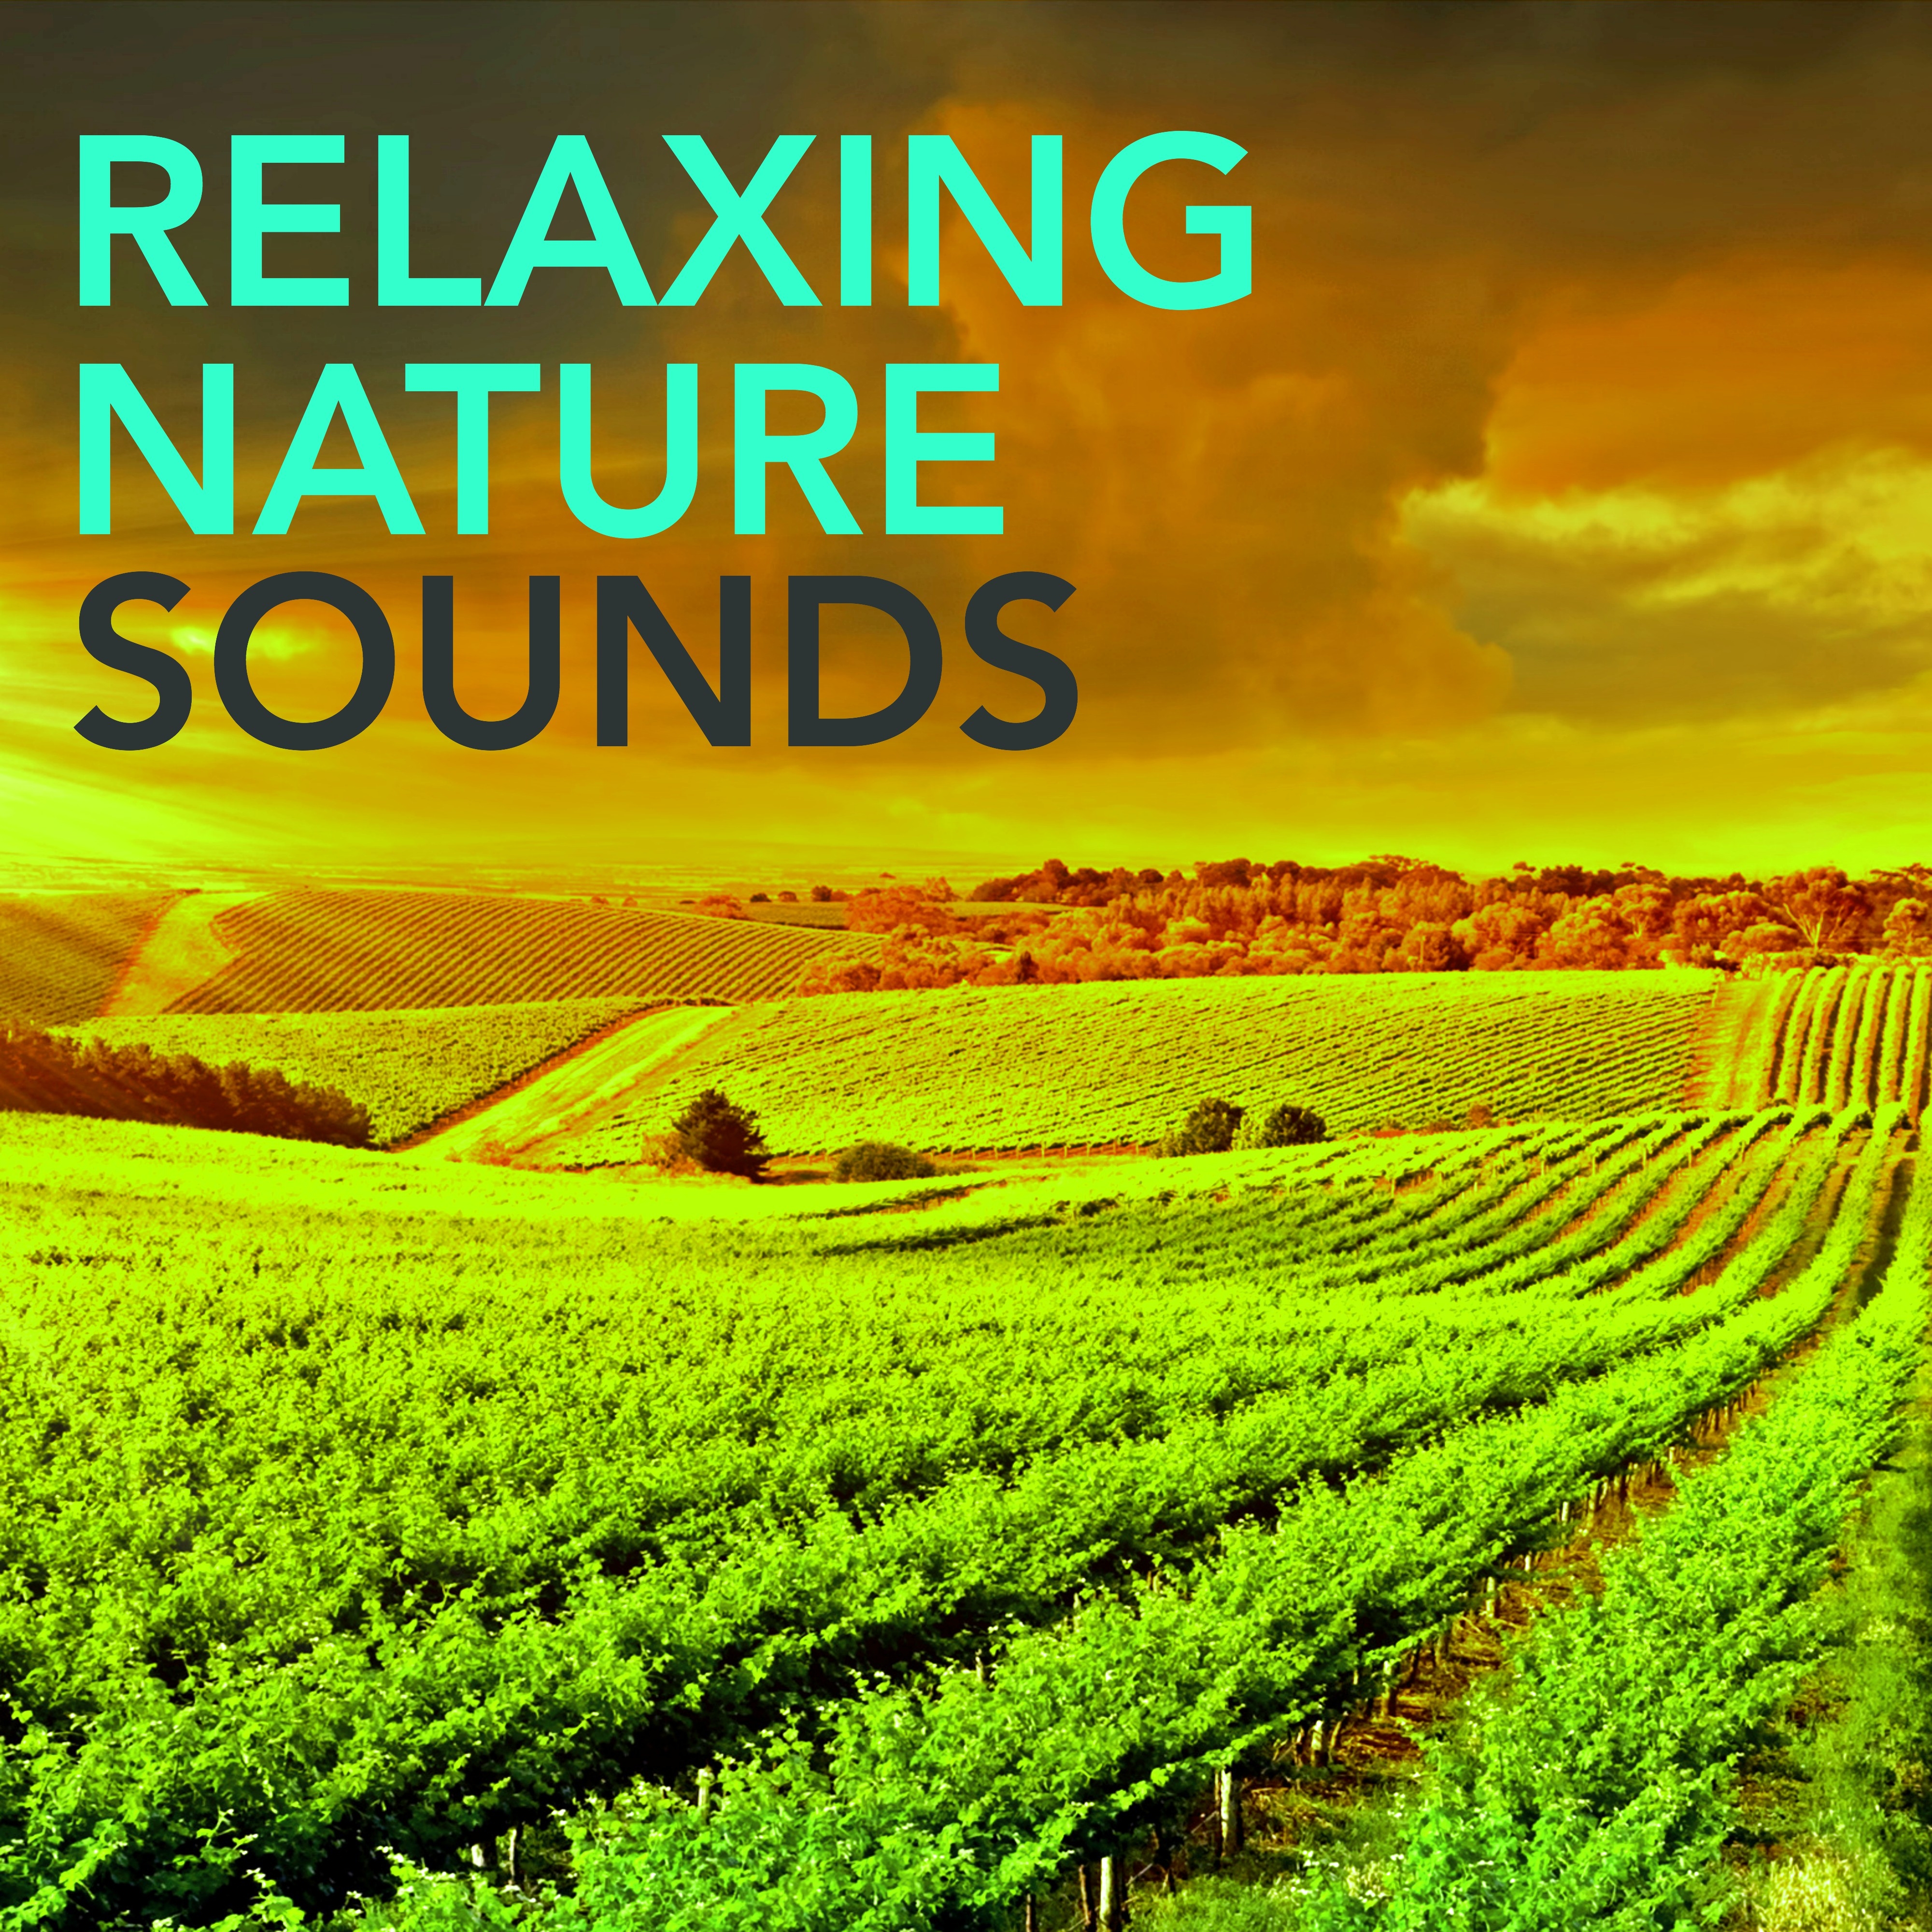 Relaxing Nature Sounds -  Waterfall Constant Roar of a Mountain Waterfall to Reduce Stress & Rest, Nature Sounds Relaxing Minds for Relaxation Time